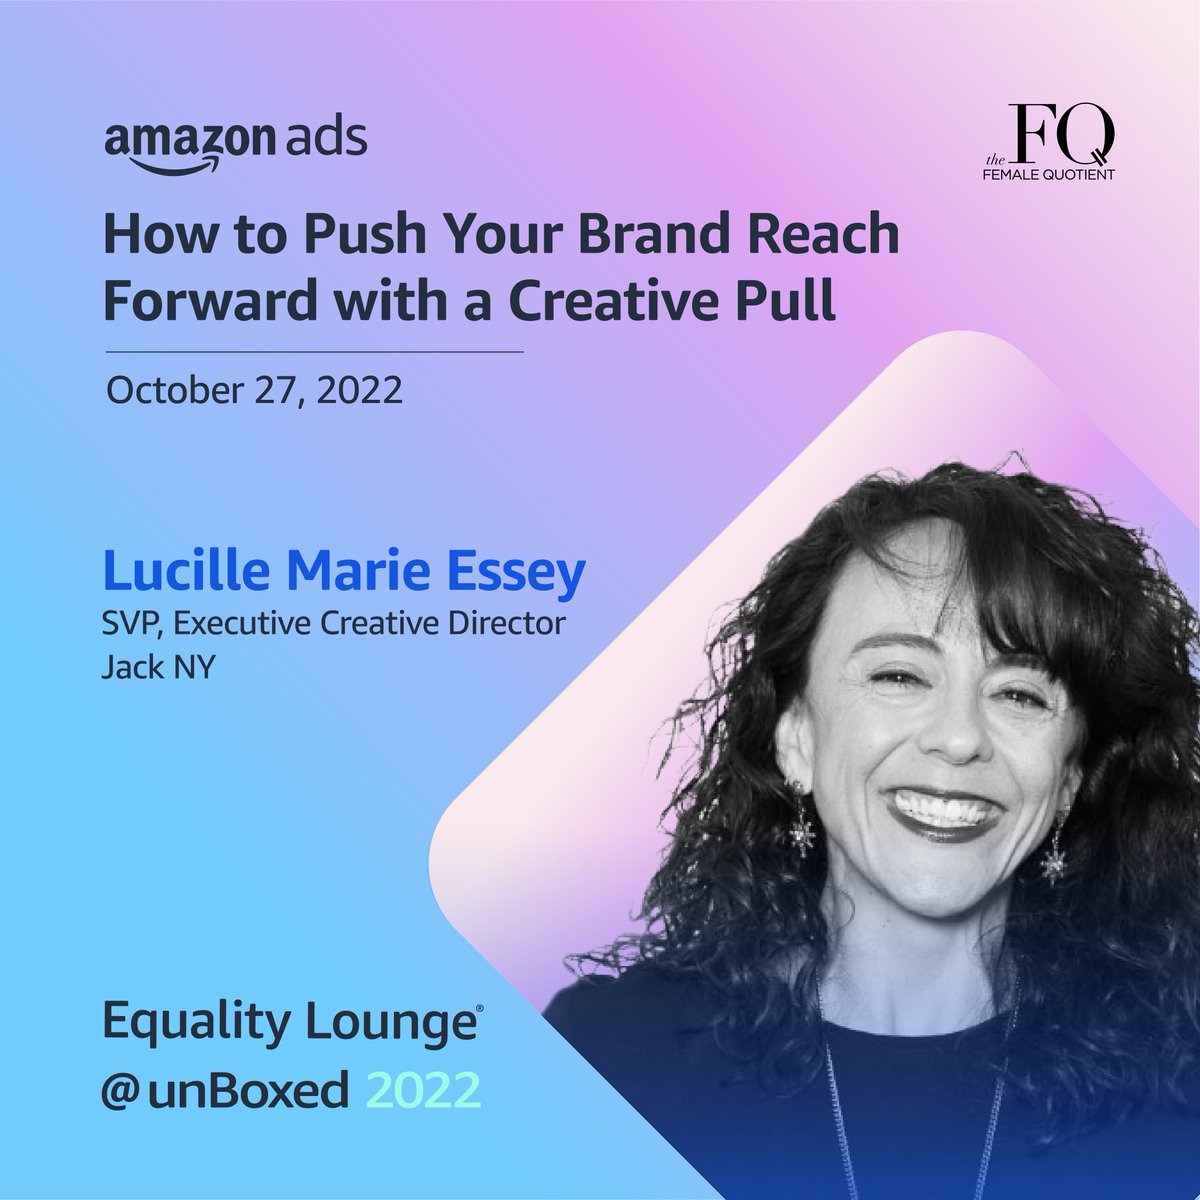 Join Lucille Essey, SVP, Executive Creative Director at Jack, alongside other industry leaders at the Female Quotient's lounge at Amazon Ads unBoxed 2022. She'll discuss how we can influence creative transformation to generate growth and also inspire inclusivity on a global scale